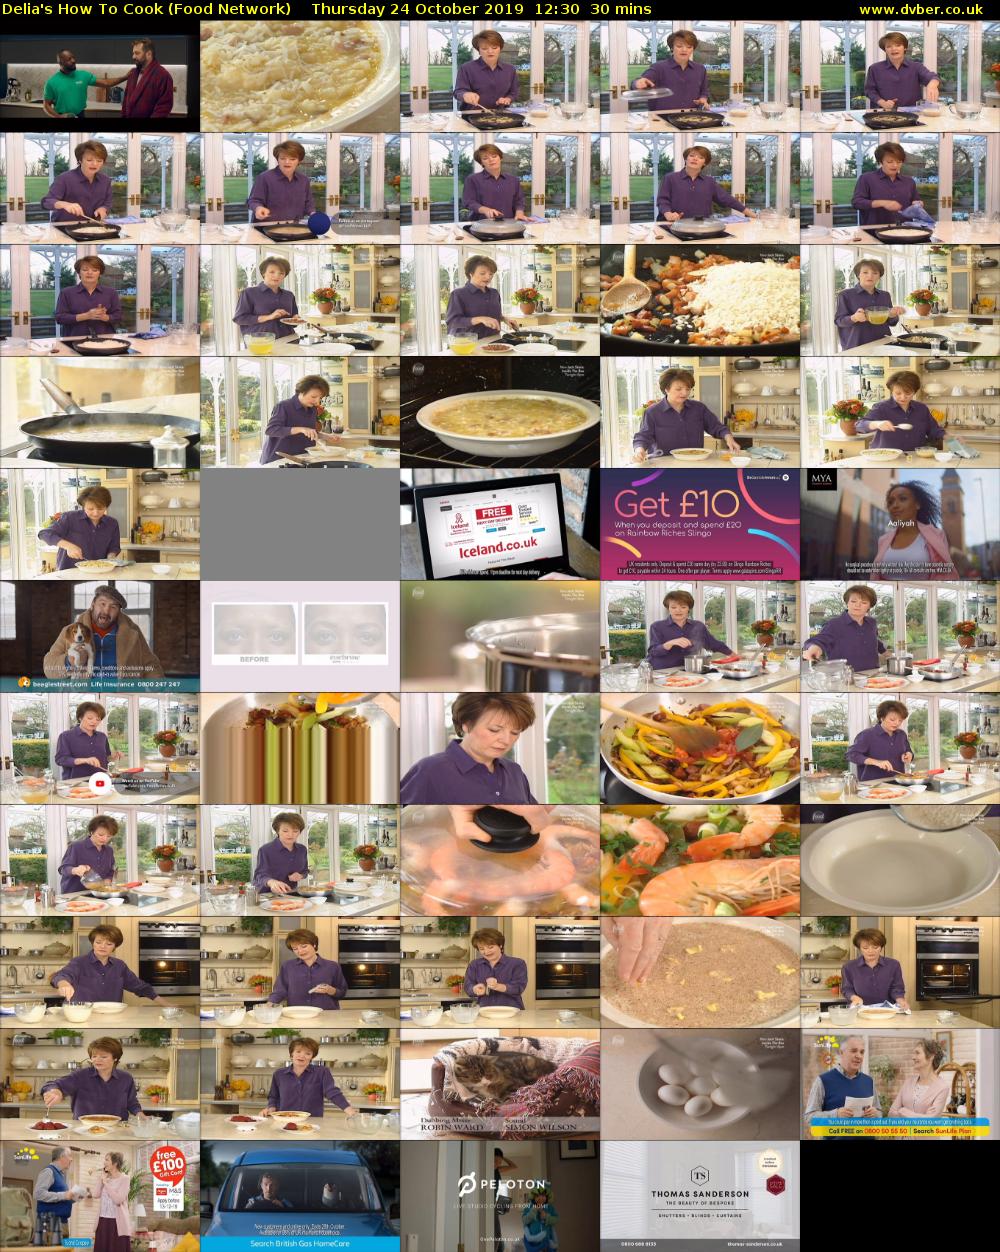 Delia's How To Cook (Food Network) Thursday 24 October 2019 12:30 - 13:00